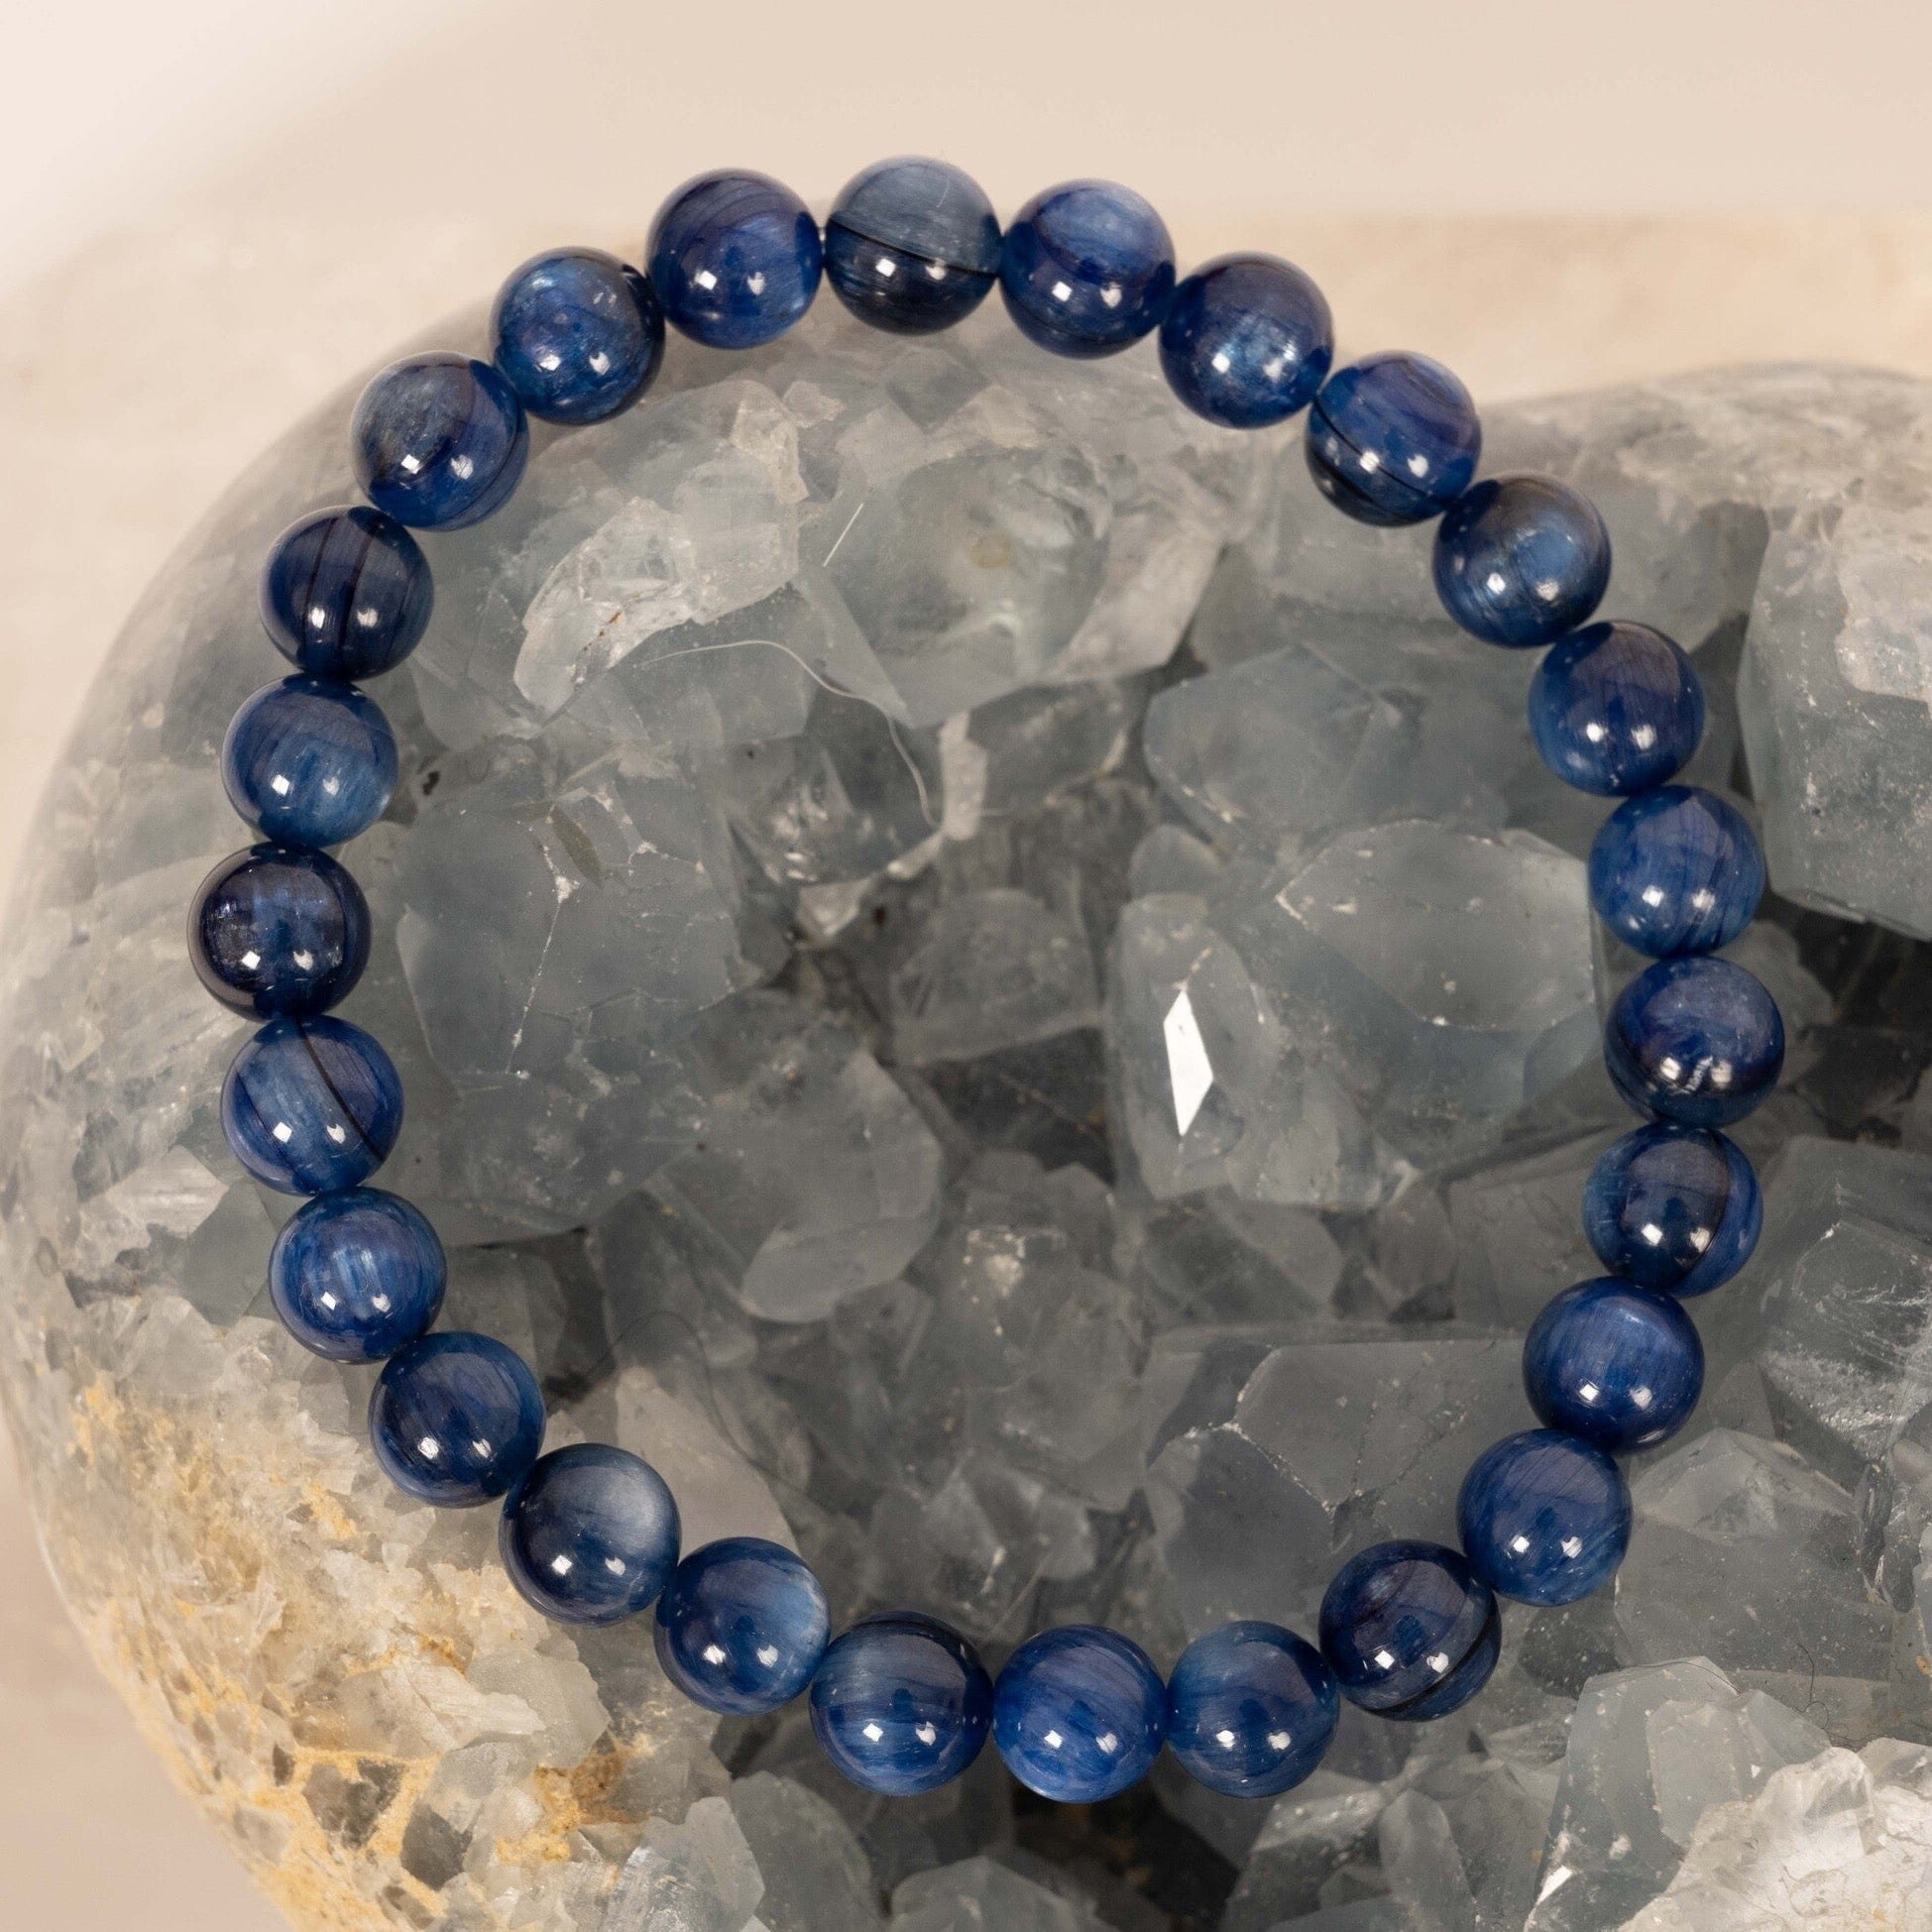 Natural Grand Blue Kyanite Sodalite Bracelet For Womens Energy And  Spiritual Practice Perfect Birthday Gift MG0323 From Stephense, $198.48 |  DHgate.Com